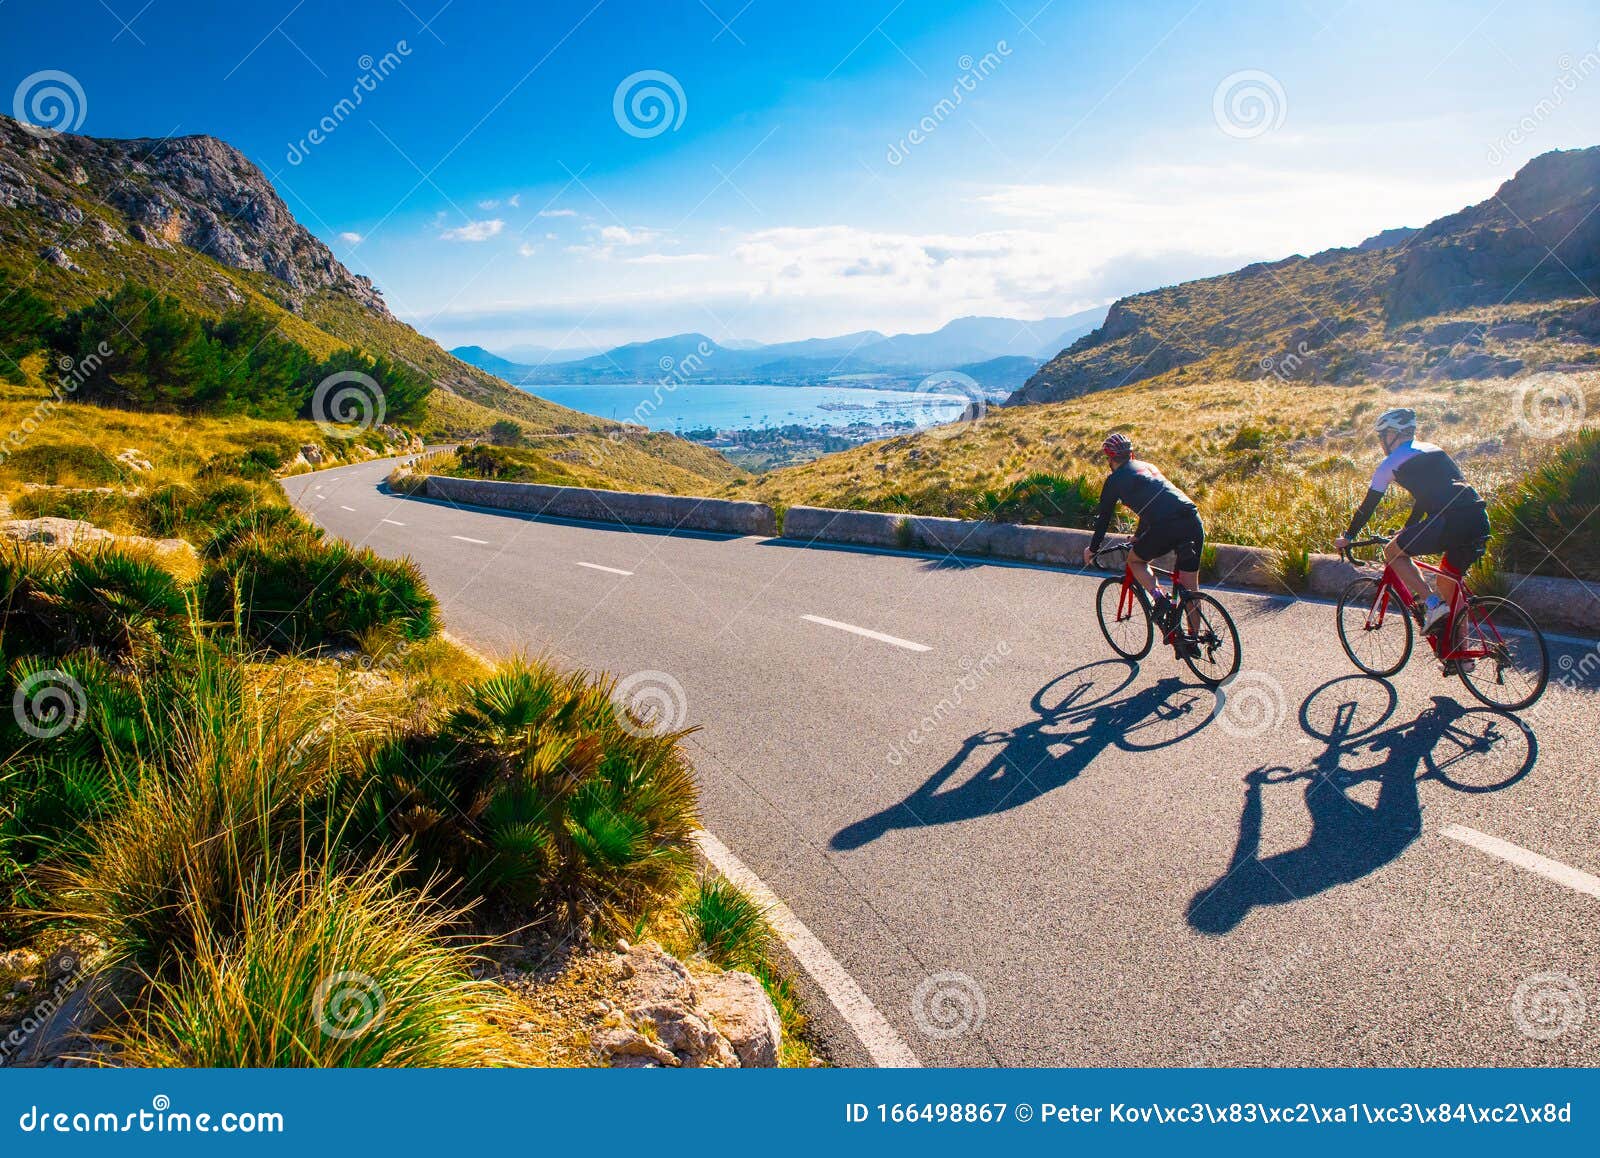 Bicycle Nature Photos - Free & Royalty-Free Stock Dreamstime